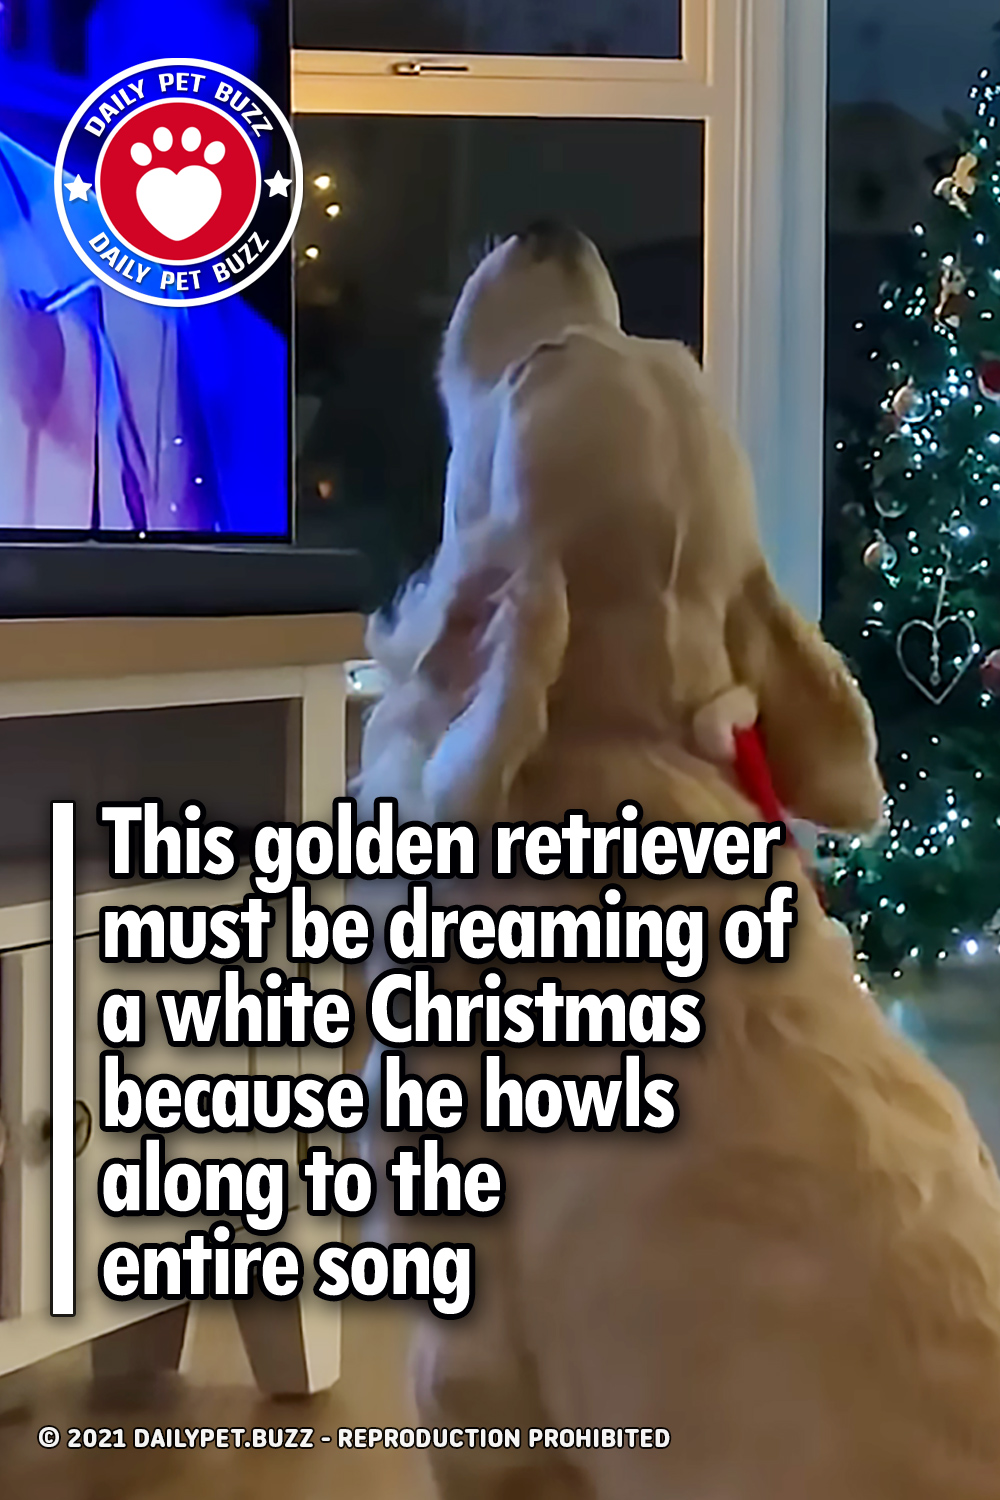 This golden retriever must be dreaming of a white Christmas because he howls along to the entire song